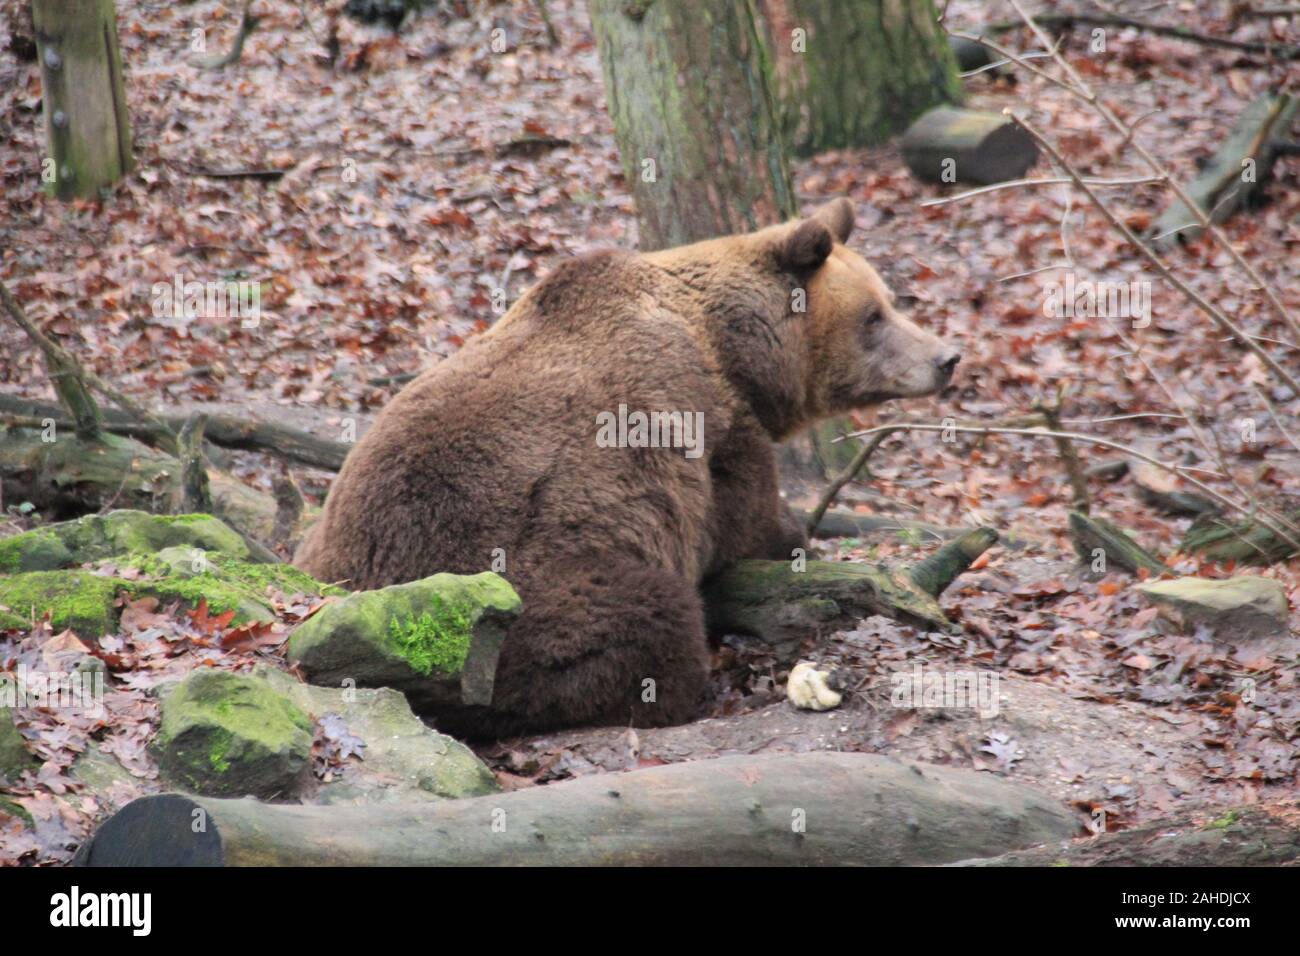 Brown bear In Ouwehands zoo in the Netherlands Stock Photo